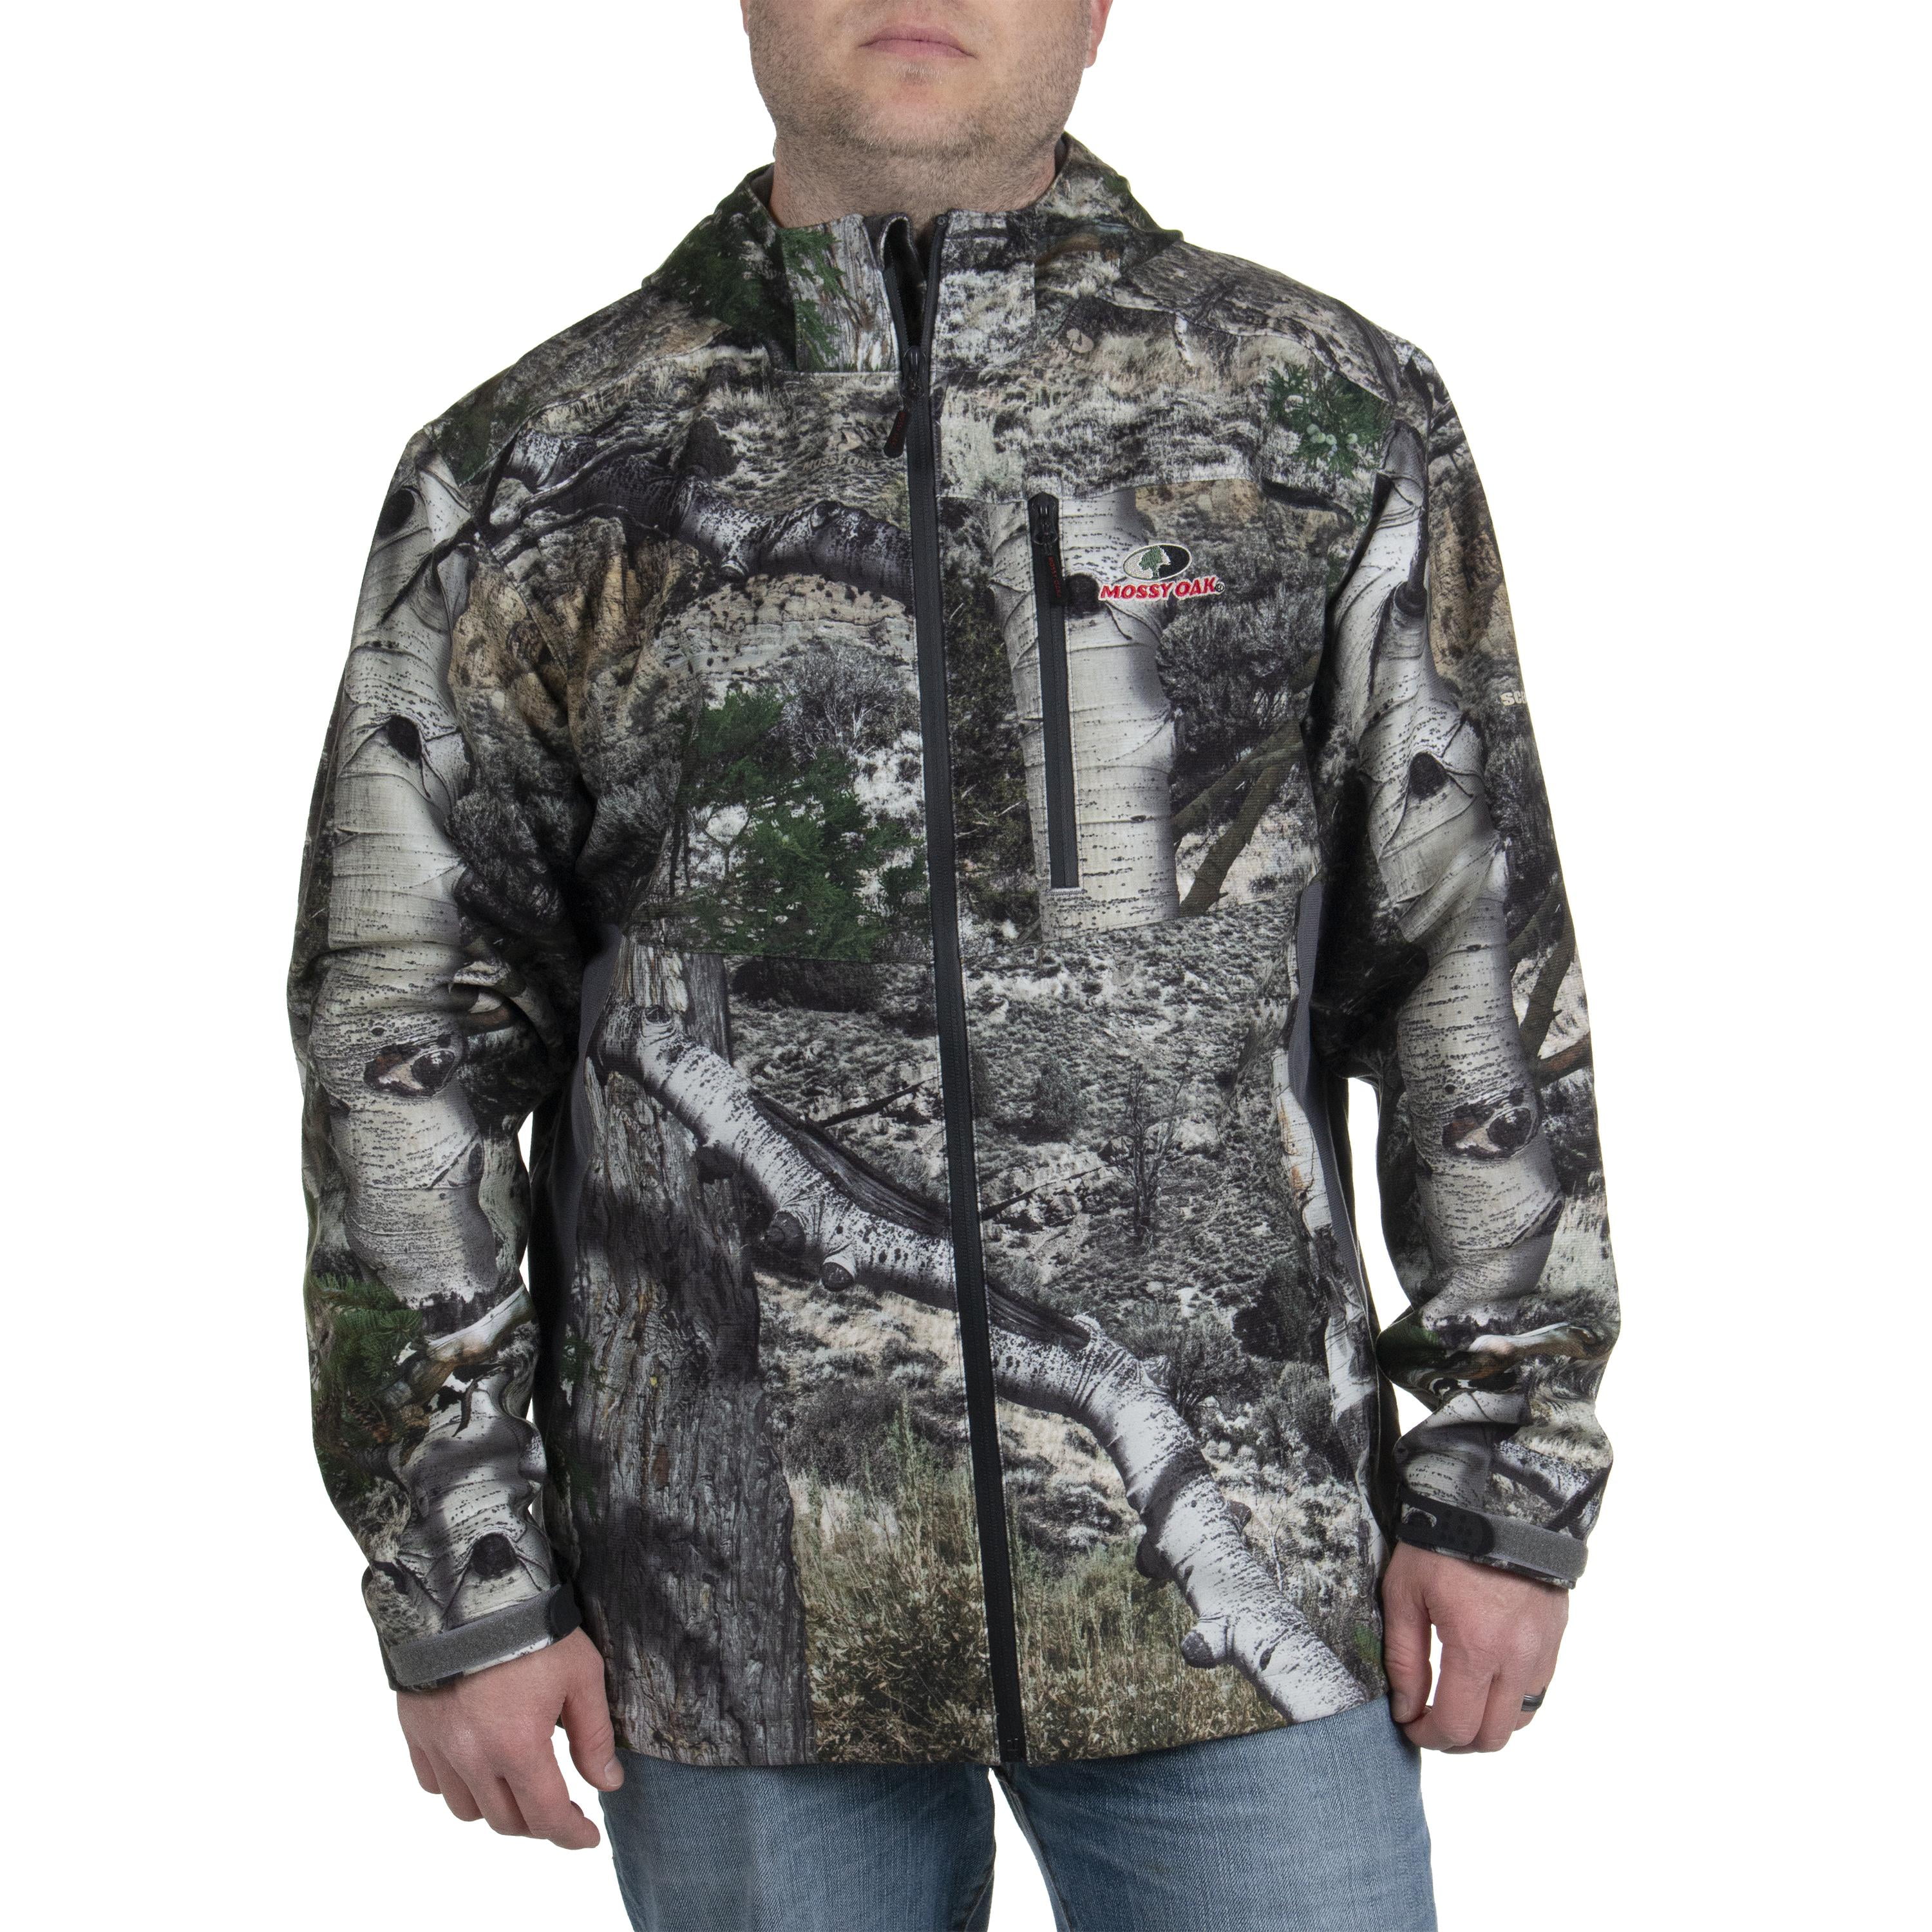 Choose Size NEW! Browning Wasatch Hunting Fleece Jacket Realtree Xtra Camo 